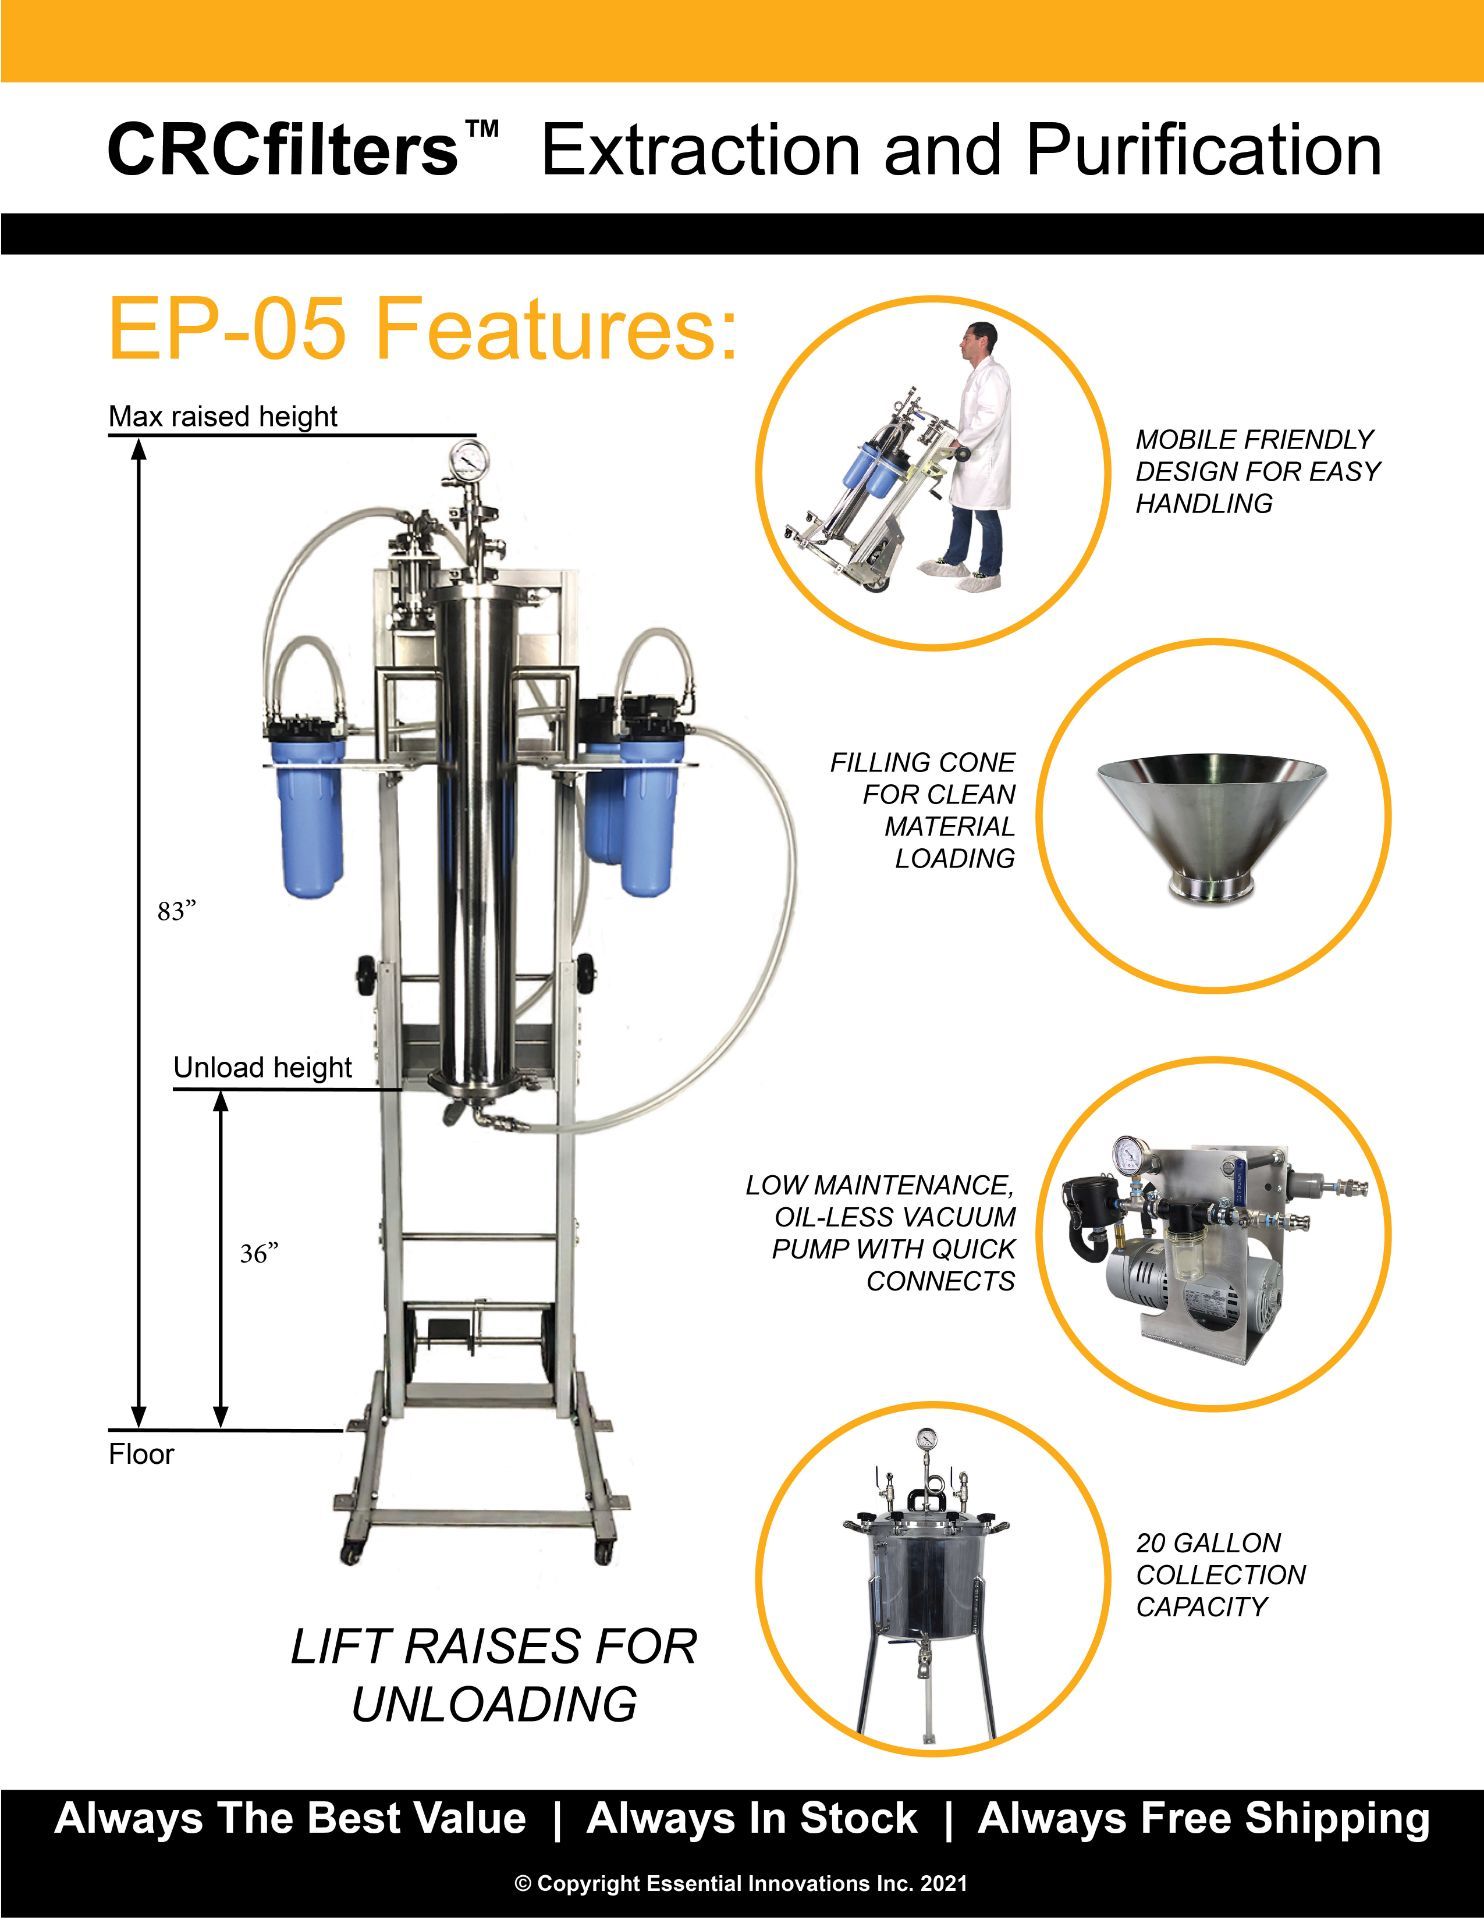 Used Turn Key CRC Filters EP-05 Ethanol Extraction and Purification System - Image 5 of 6